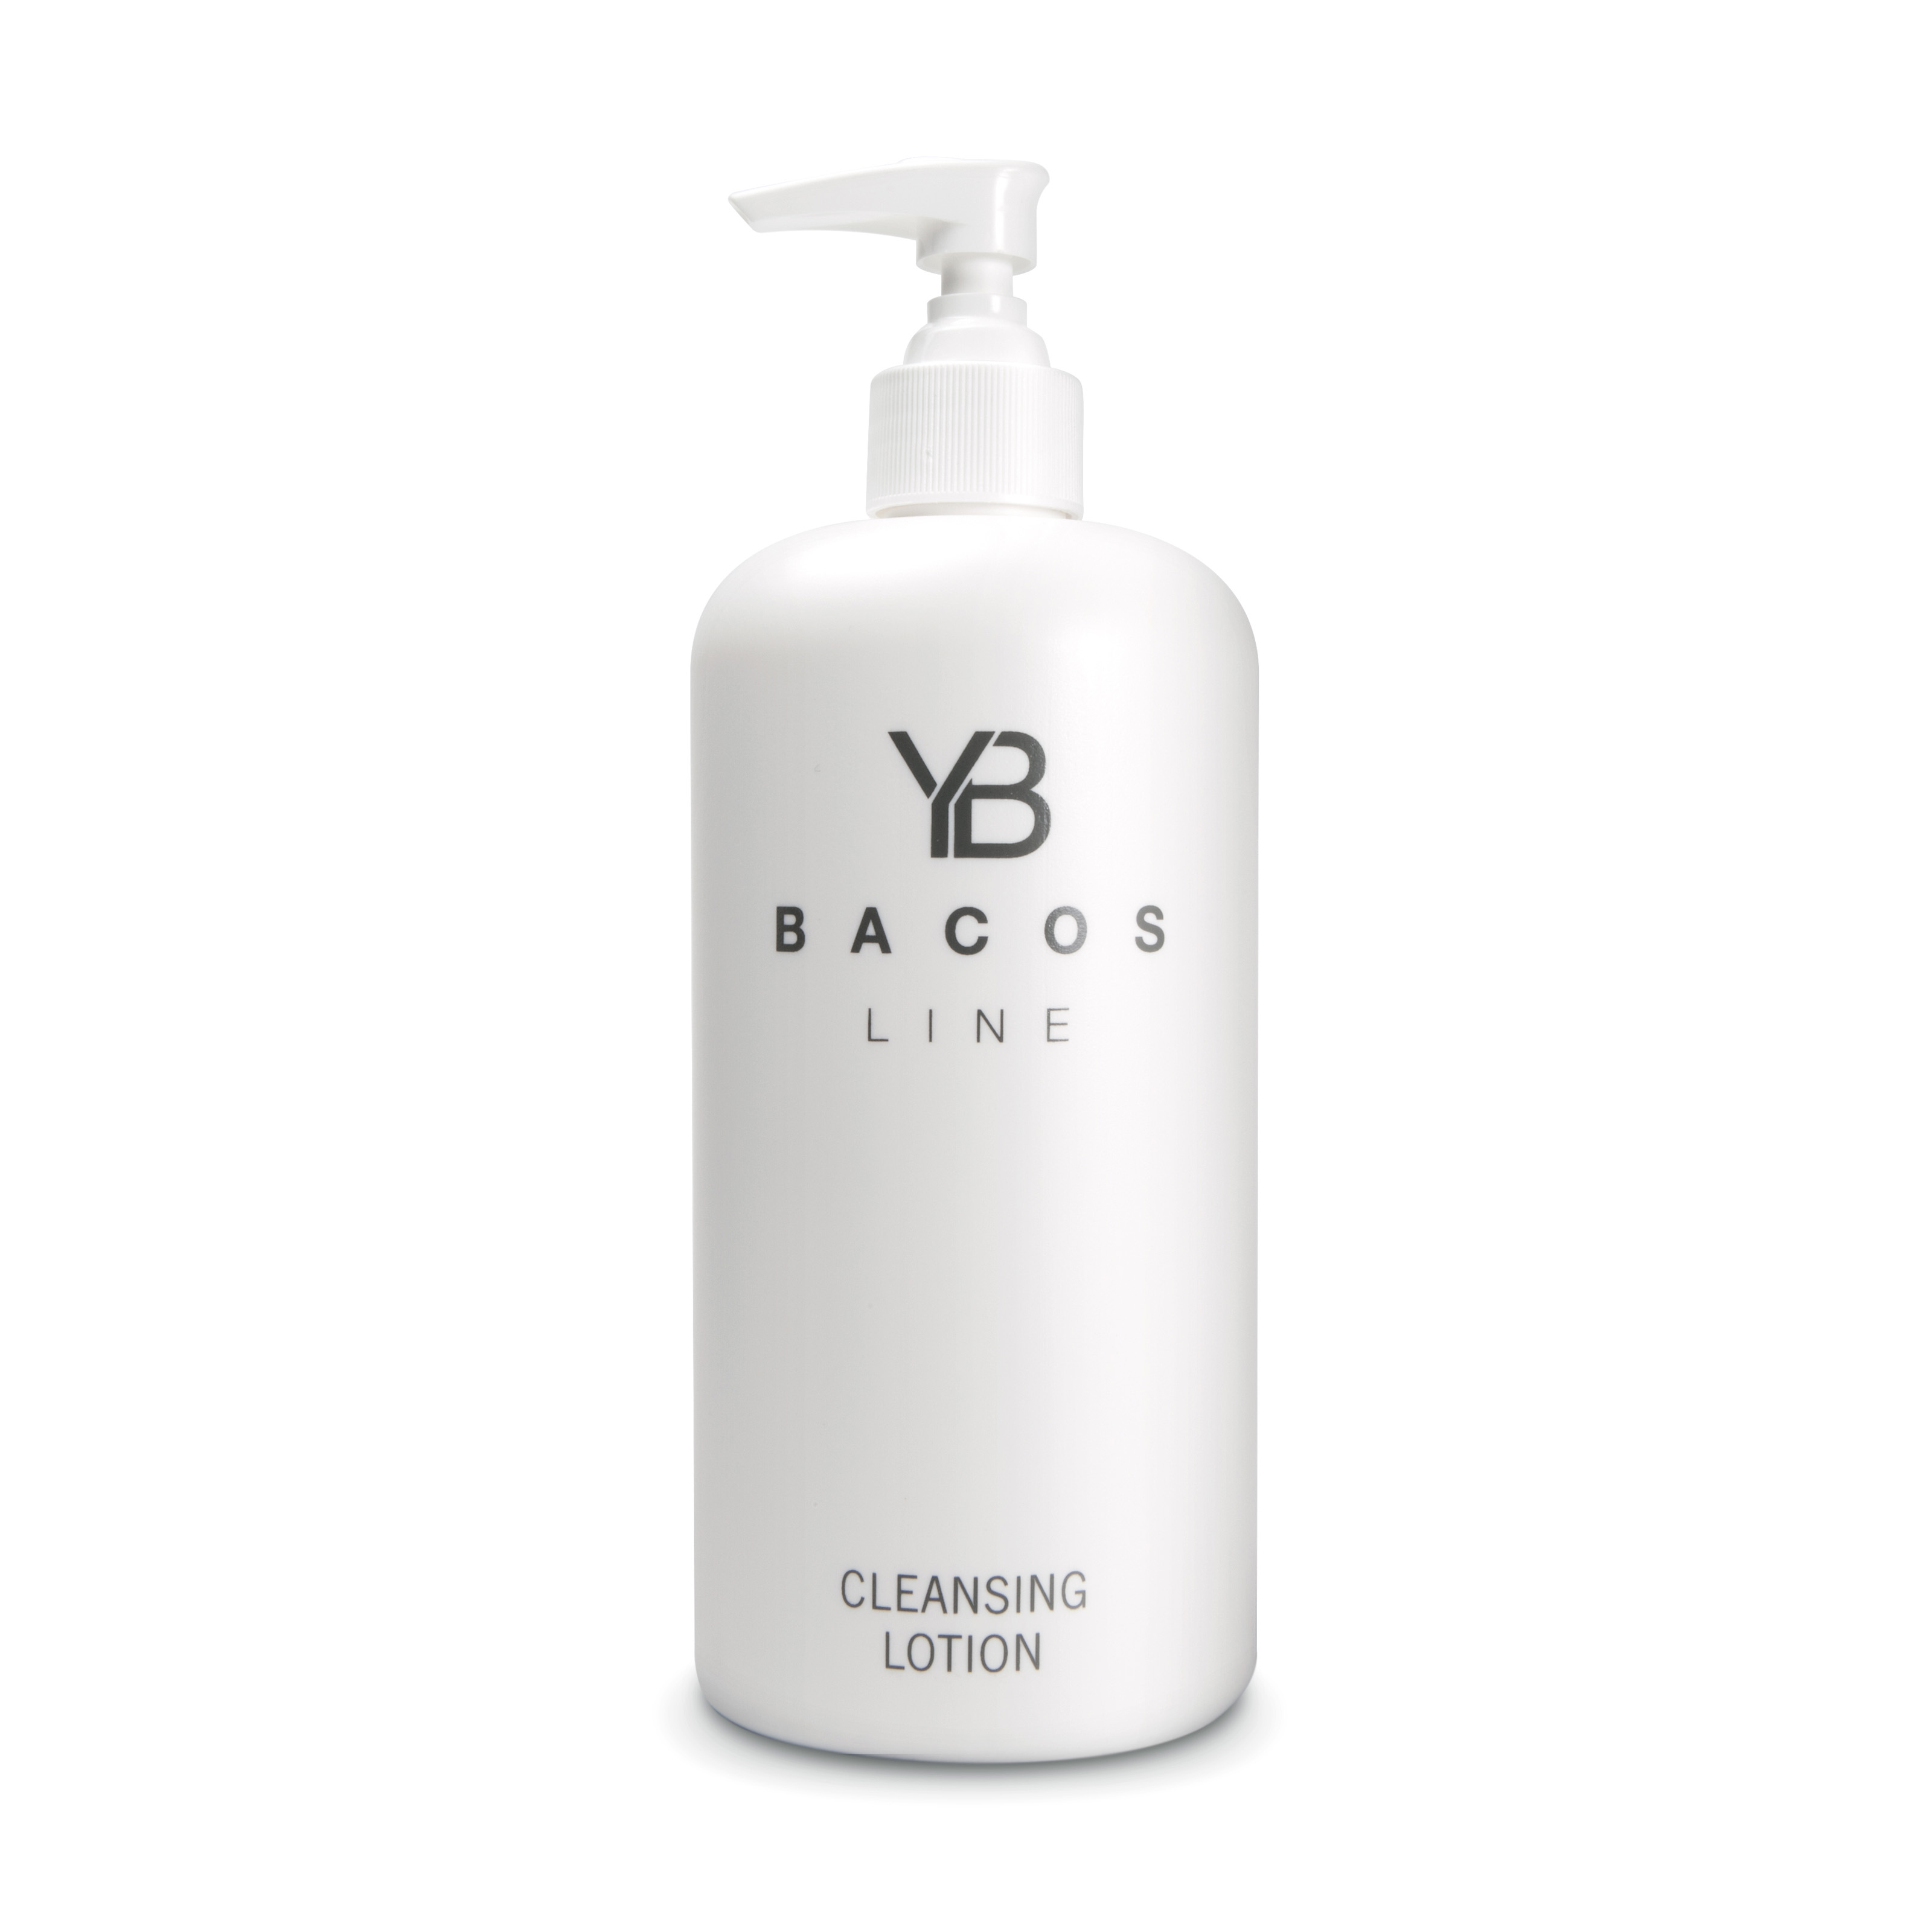 YB BACOS LINE CLEANSING LOTION - 500 ml